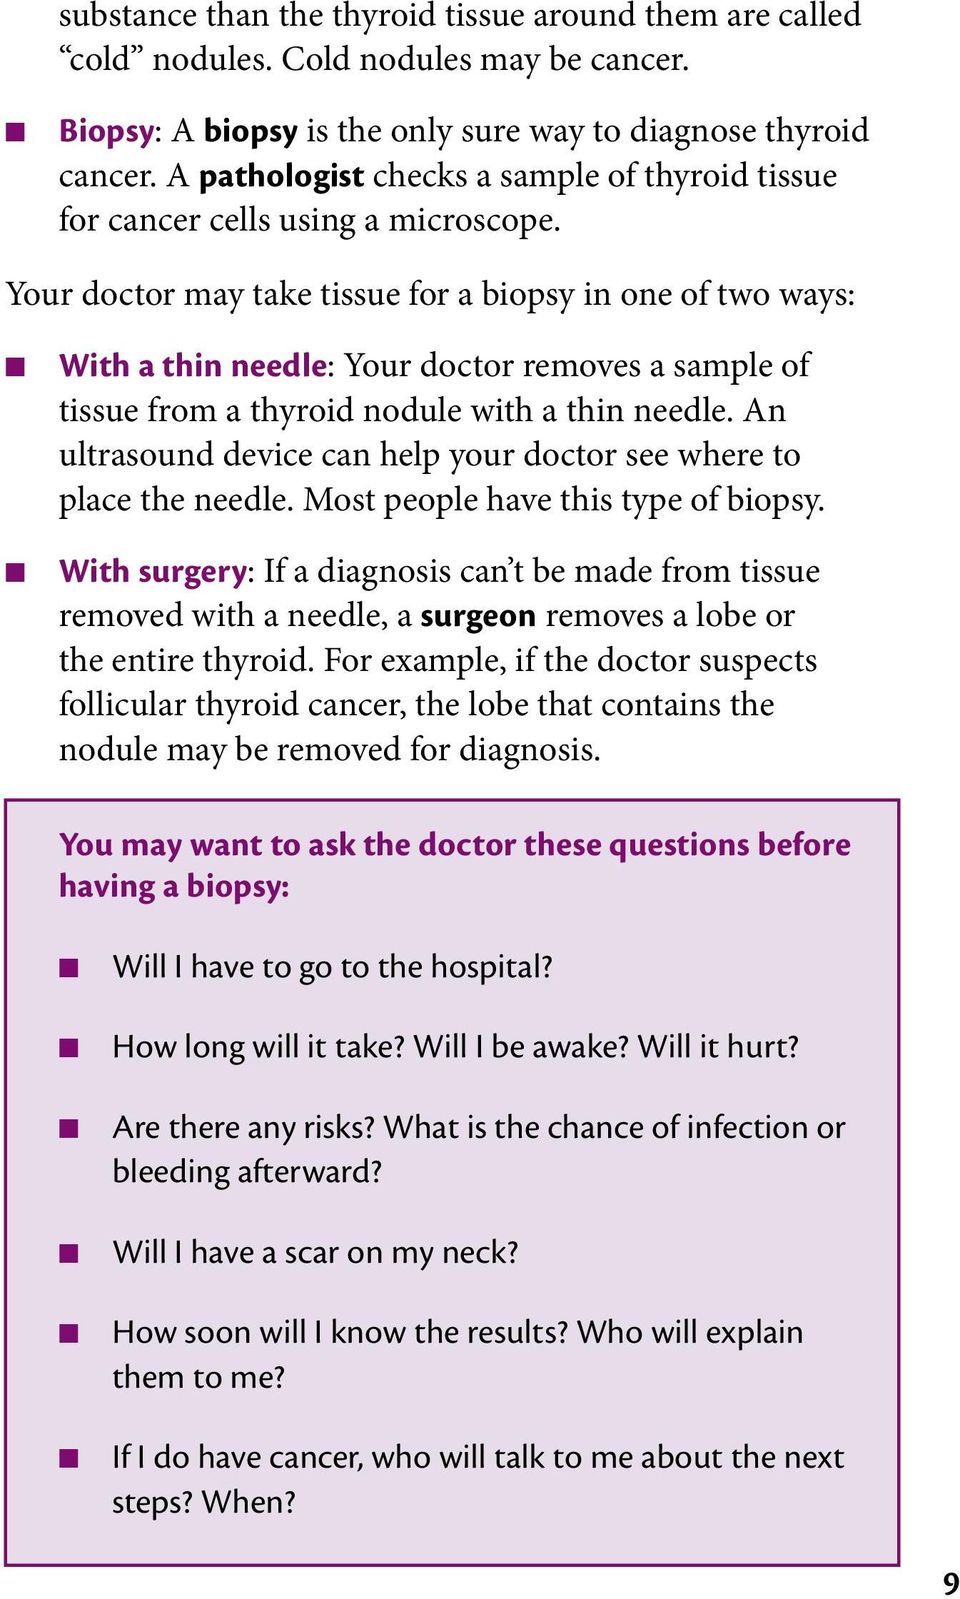 Your doctor may take tissue for a biopsy in one of two ways: With a thin needle: Your doctor removes a sample of tissue from a thyroid nodule with a thin needle.